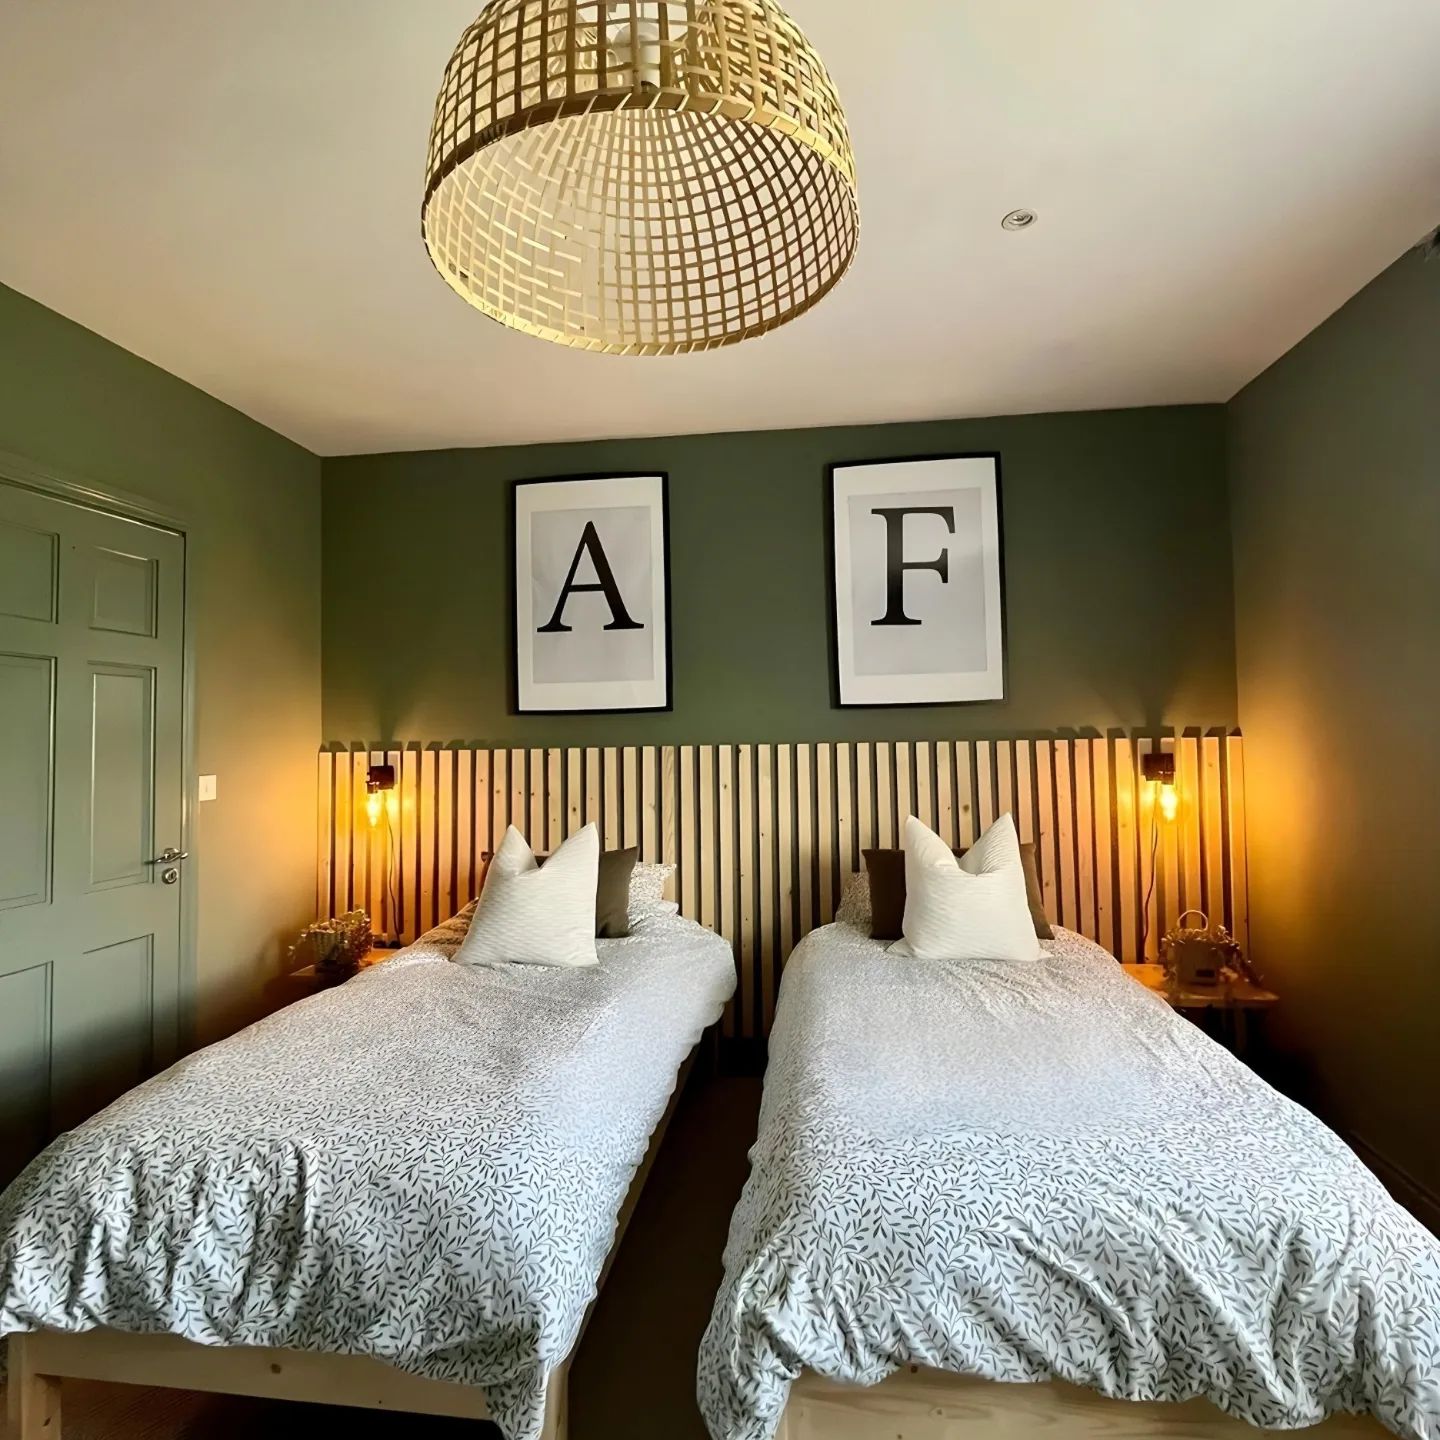 This beautiful bedroom painted by @handpaintedbygillian features 🎨 Sage from the @alchemistpaint MOOD Collection.

A dark, sage green with subtle grey undertones. Sage has an almost chalky quality that creates a softness despite its depth of colour. It is beautifully crisp when paired with whites like Blank Canvas and Icing Sugar.

Available today in-store and online at stillorgandecor.ie for delivery nationwide.